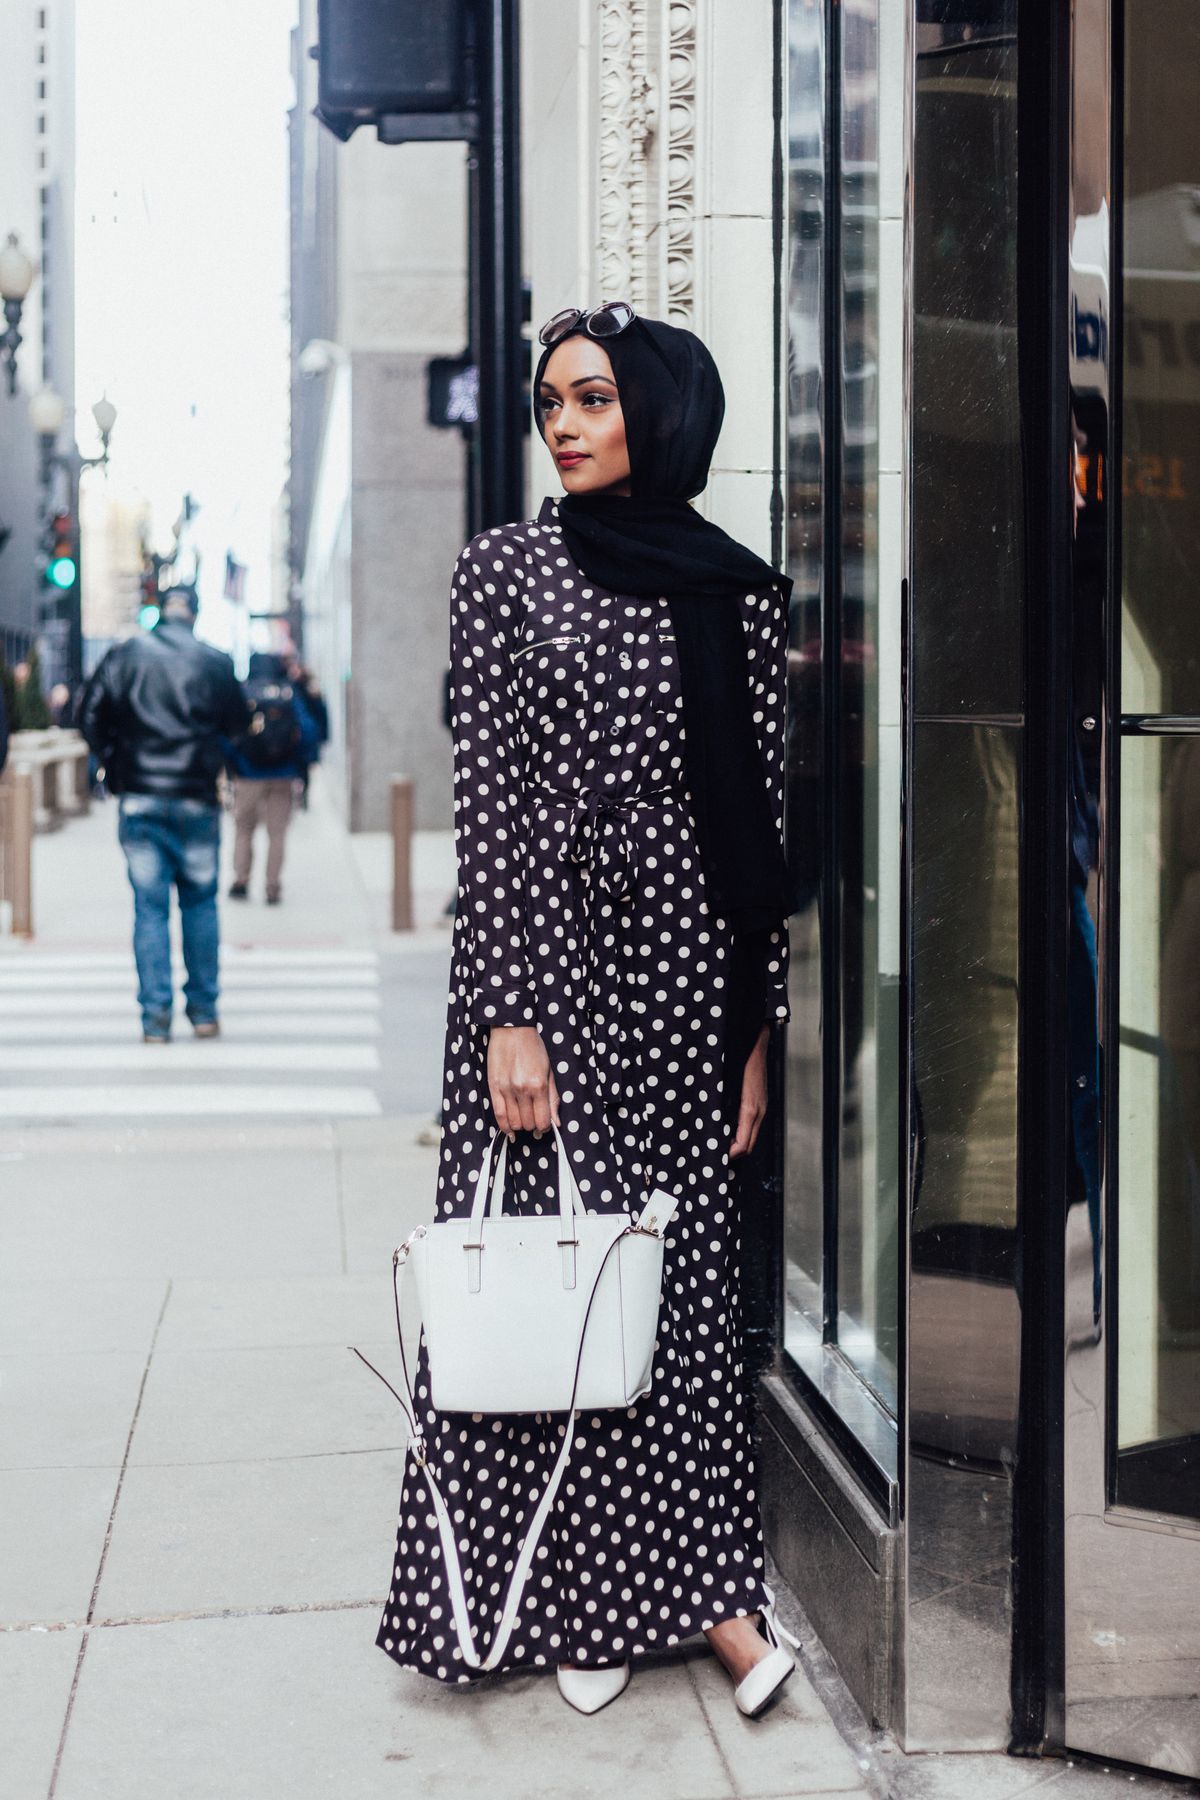 A high-end Modest Fashion Show returns to the I Heart Halal fest this year at Navy Pier. | Ryan Deloney Photography